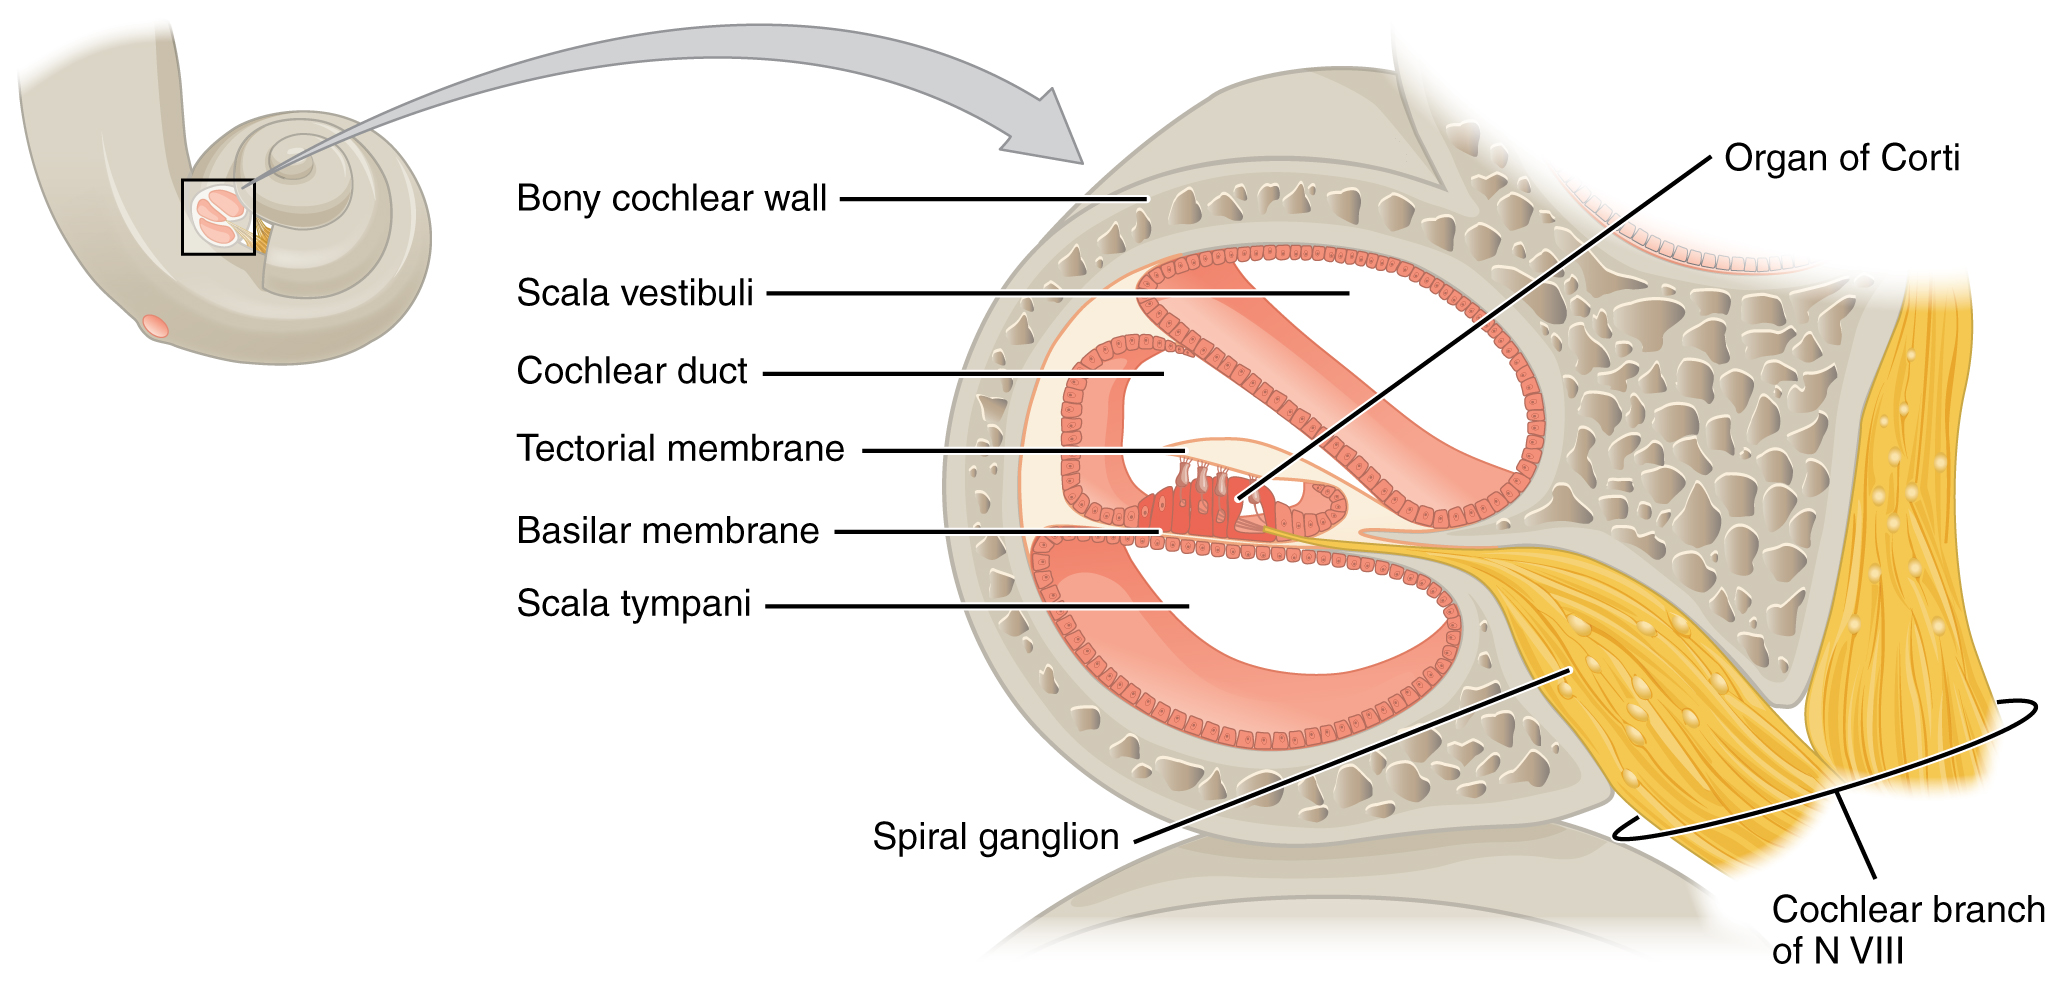 This diagram shows the structure of the cochlea in the inner ear. Labels read (from top, counter clockwise): bony cochlear wall, scala vestibuli, cochlear duct, tectorial membrane, basilar membrane, scala tympani, spiral ganglion, cochlear branch of N VIII, organ of Corti.